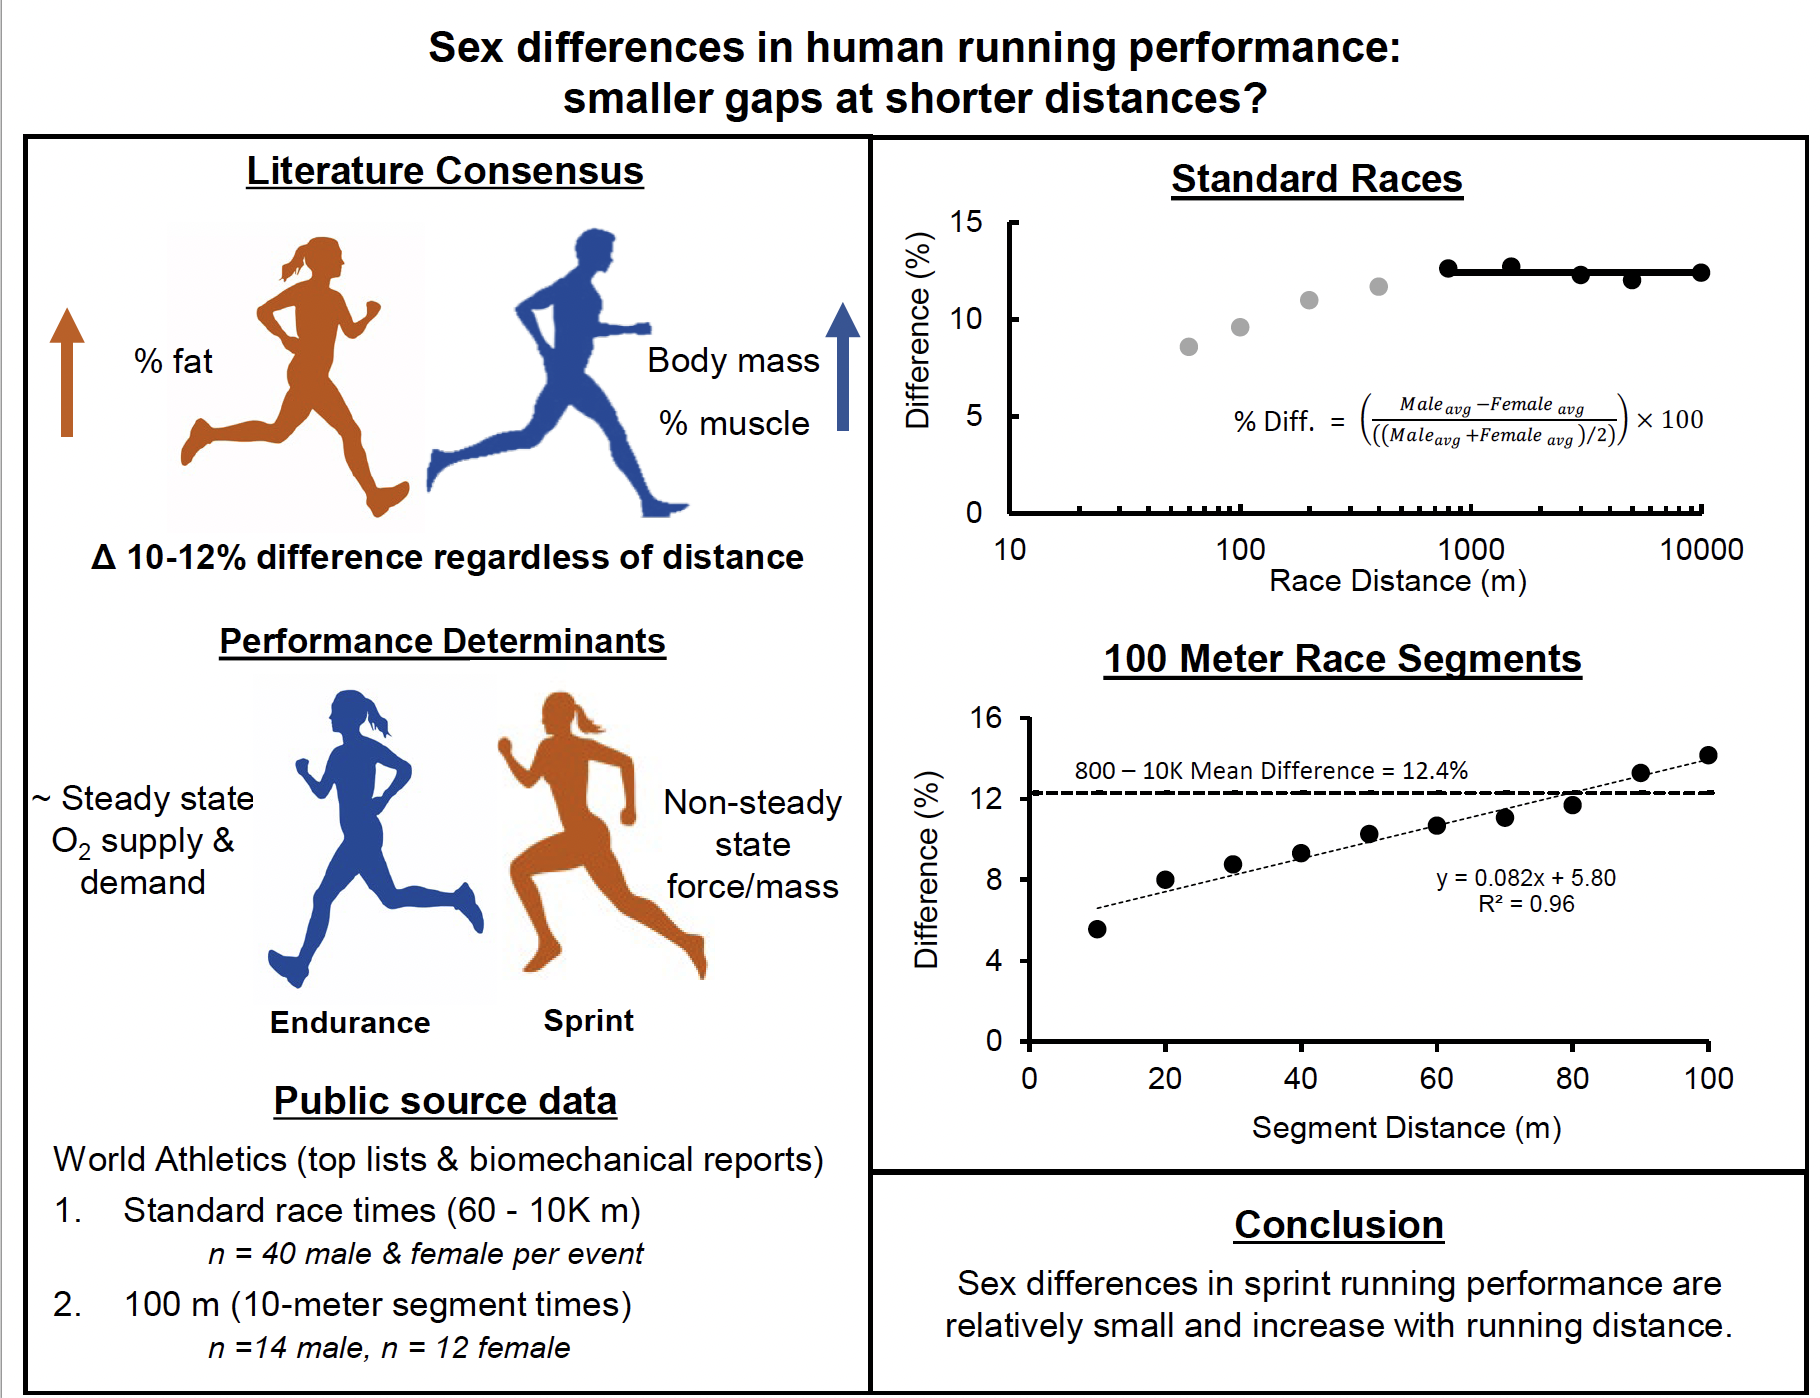 Sex differences in sprint running